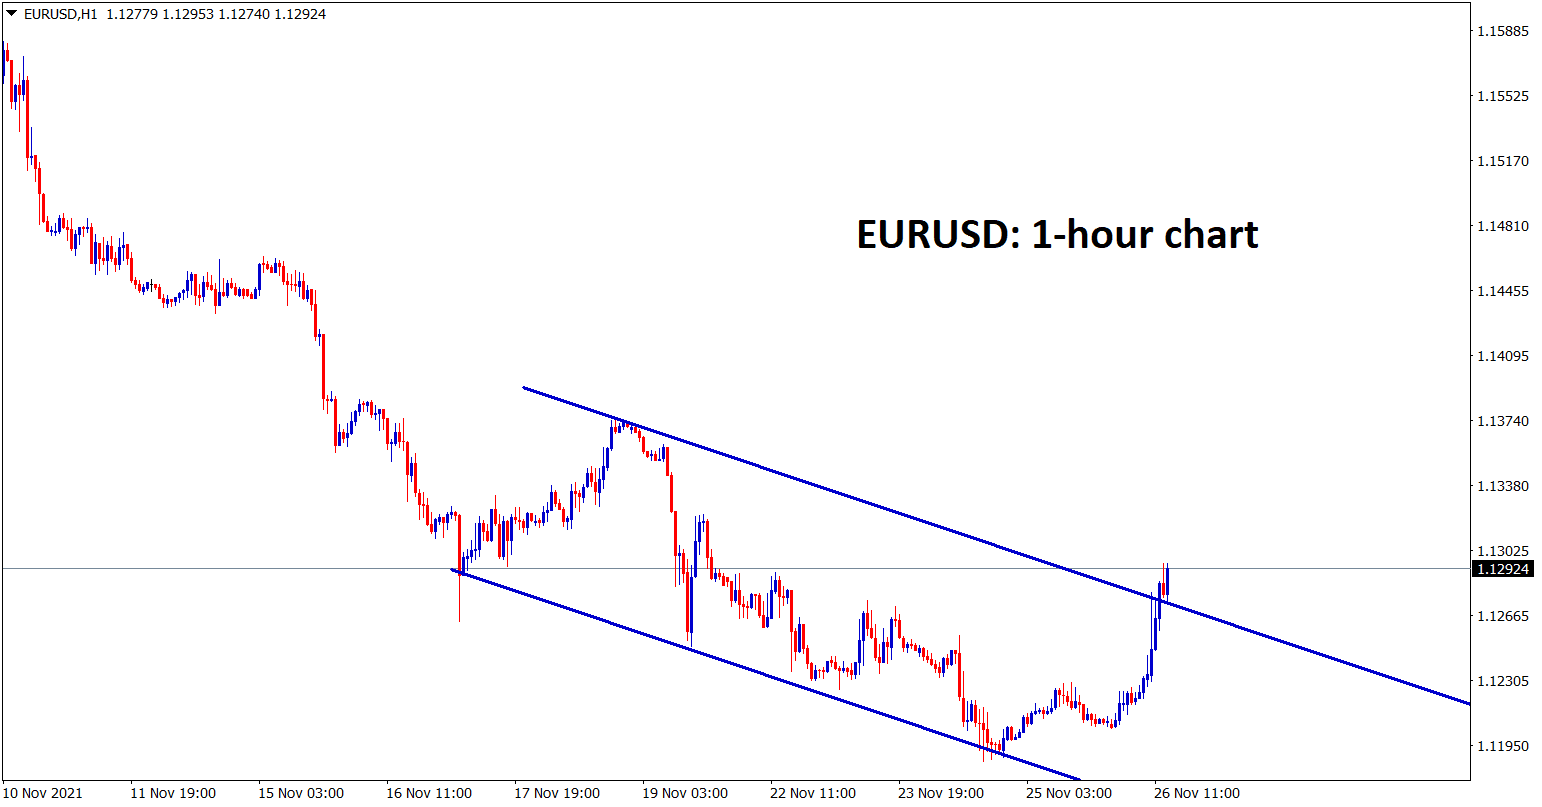 EURUSD is trying to break the lower high of the minor descending channel